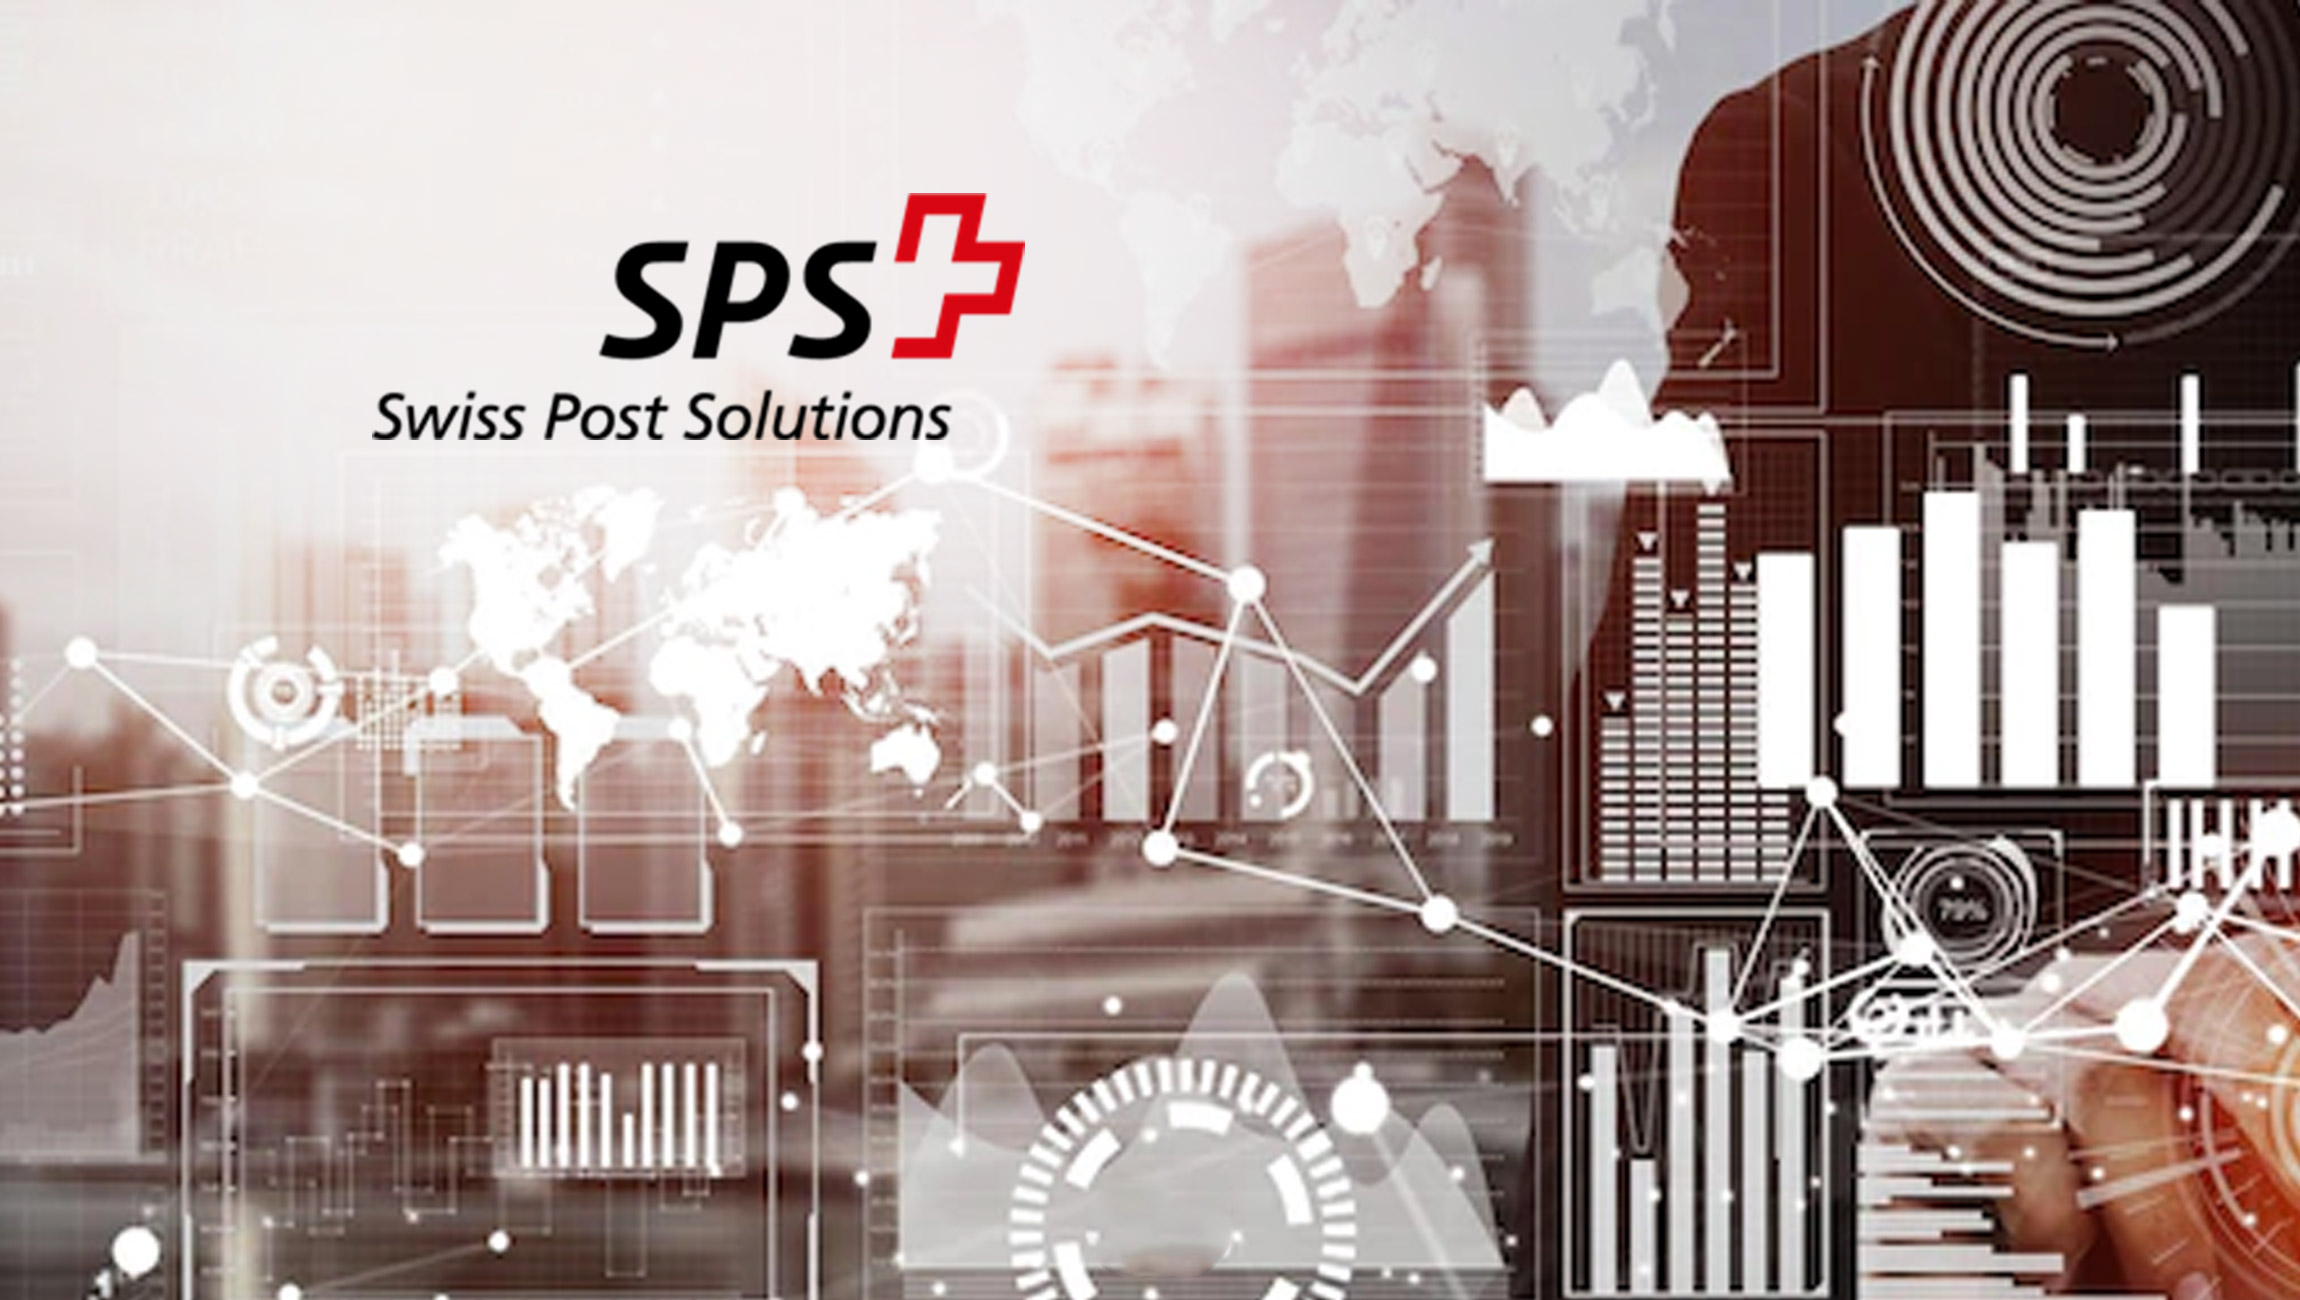 Swiss Post Solutions named to Global Outsourcing 100 for tenth consecutive year